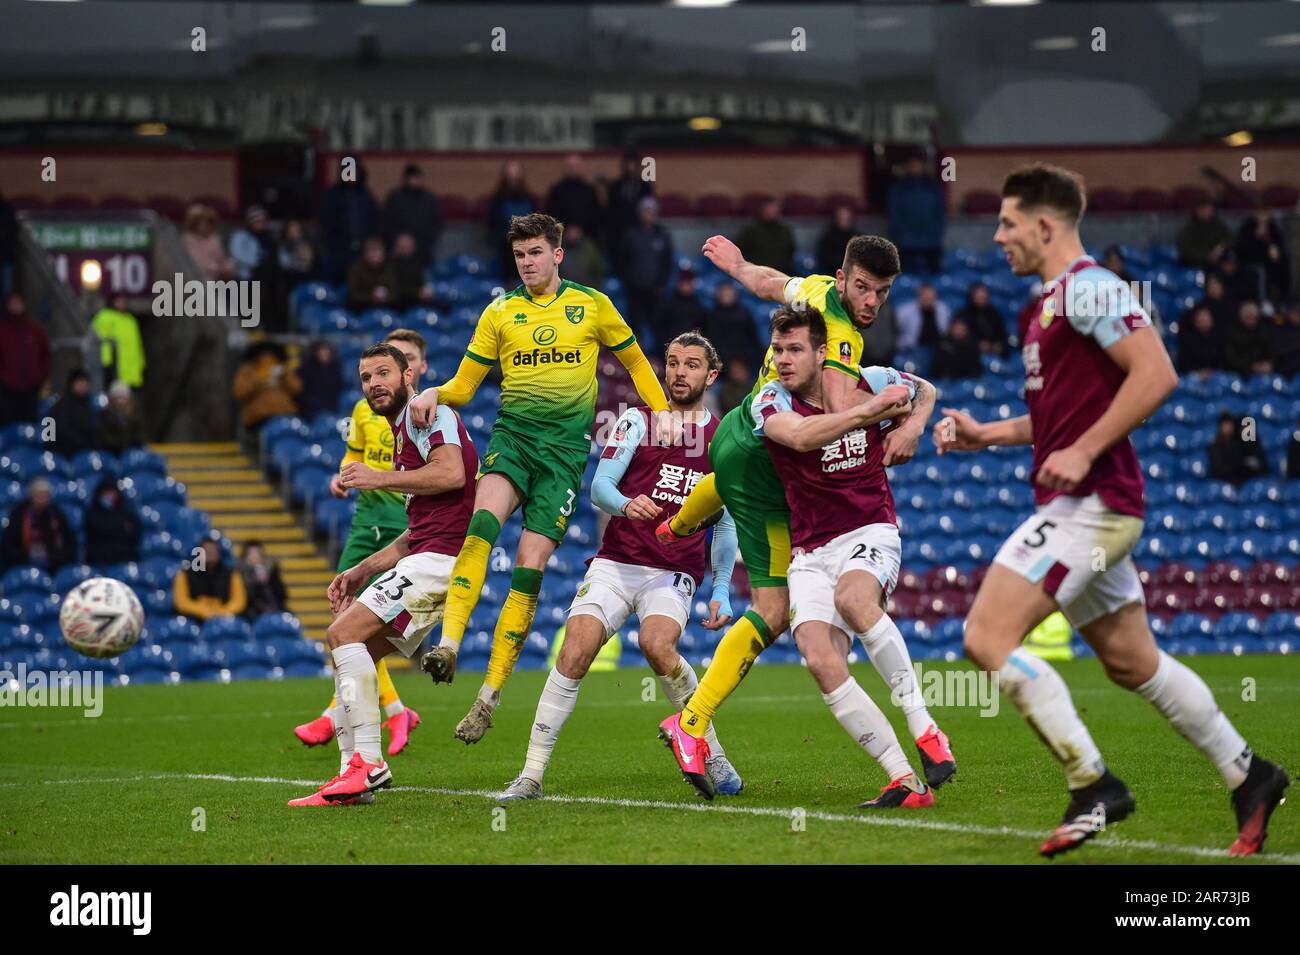 25th January 2020, Turf Moor, Burnley, England; Emirates FA Cup, Burnley v Norwich City : Grant Hanley (5) of Norwich City heads the ball in to make it 0-1 Stock Photo